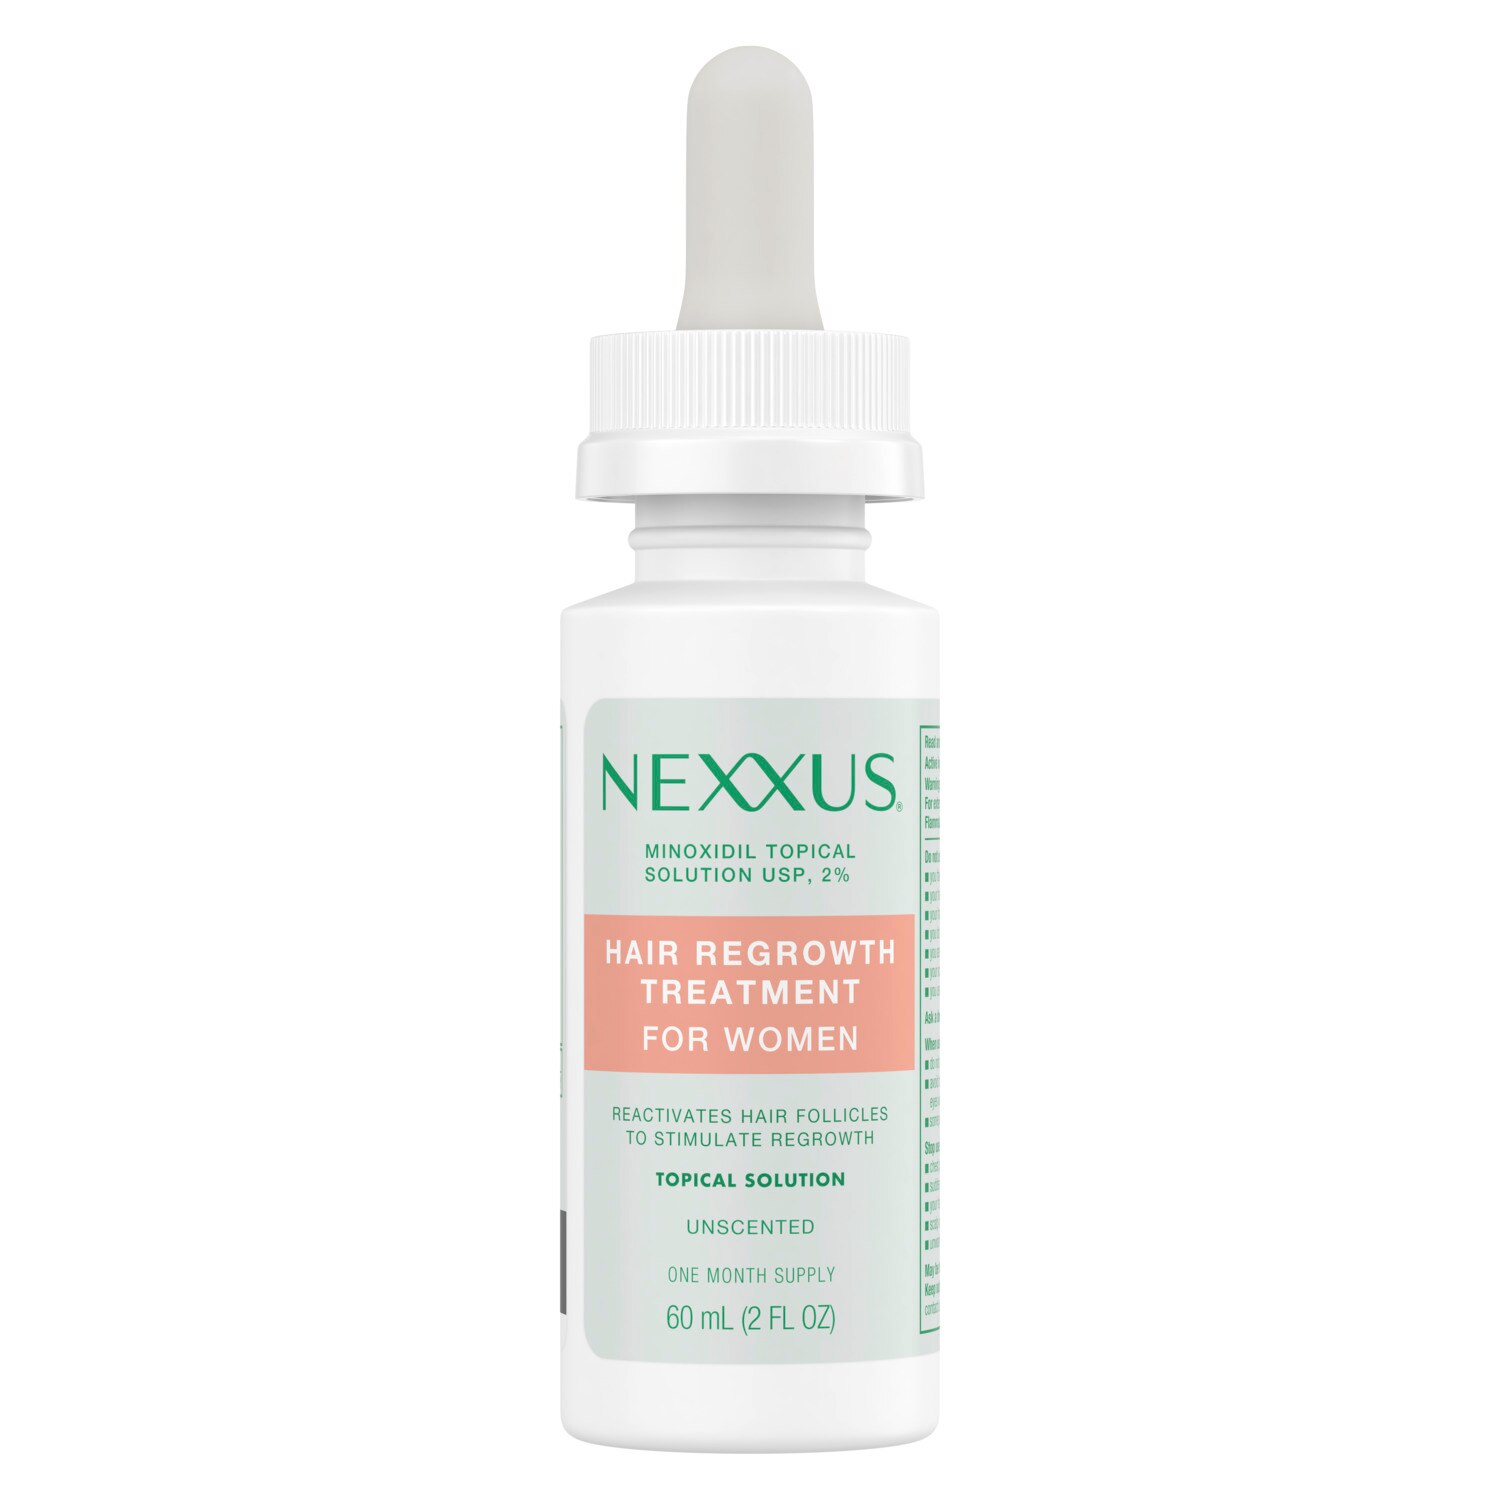 Nexxus Women's 2% Minoxidil Topical Solution For Hair Regrowth, 1-Month Supply